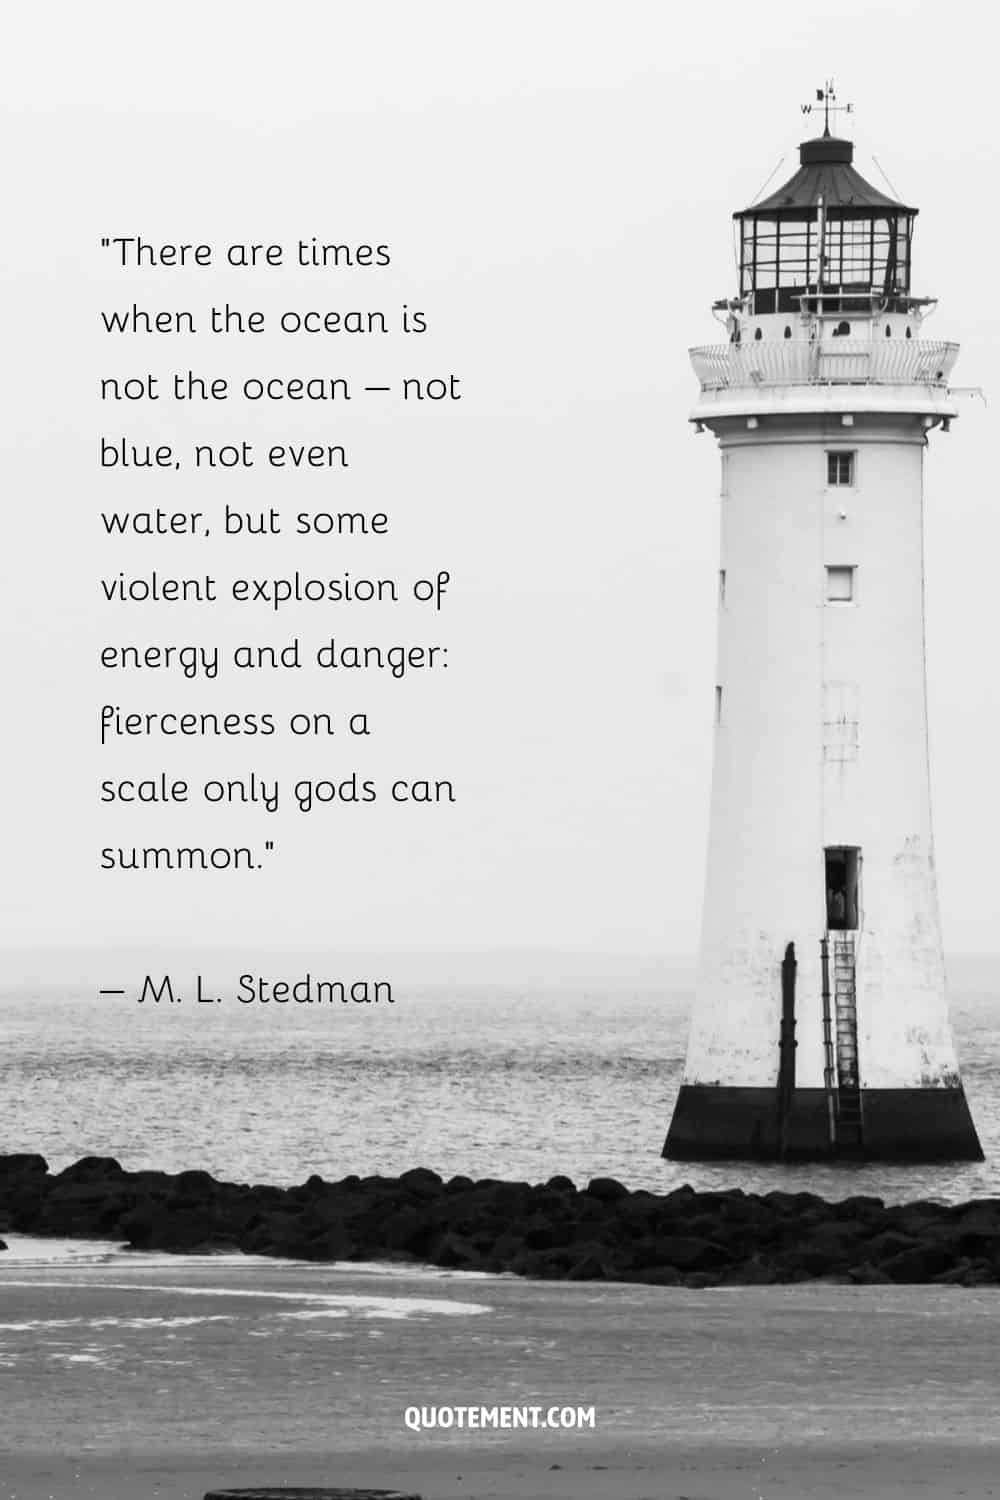 Deep quote by M. L. Stedman and a lighthouse in black and white